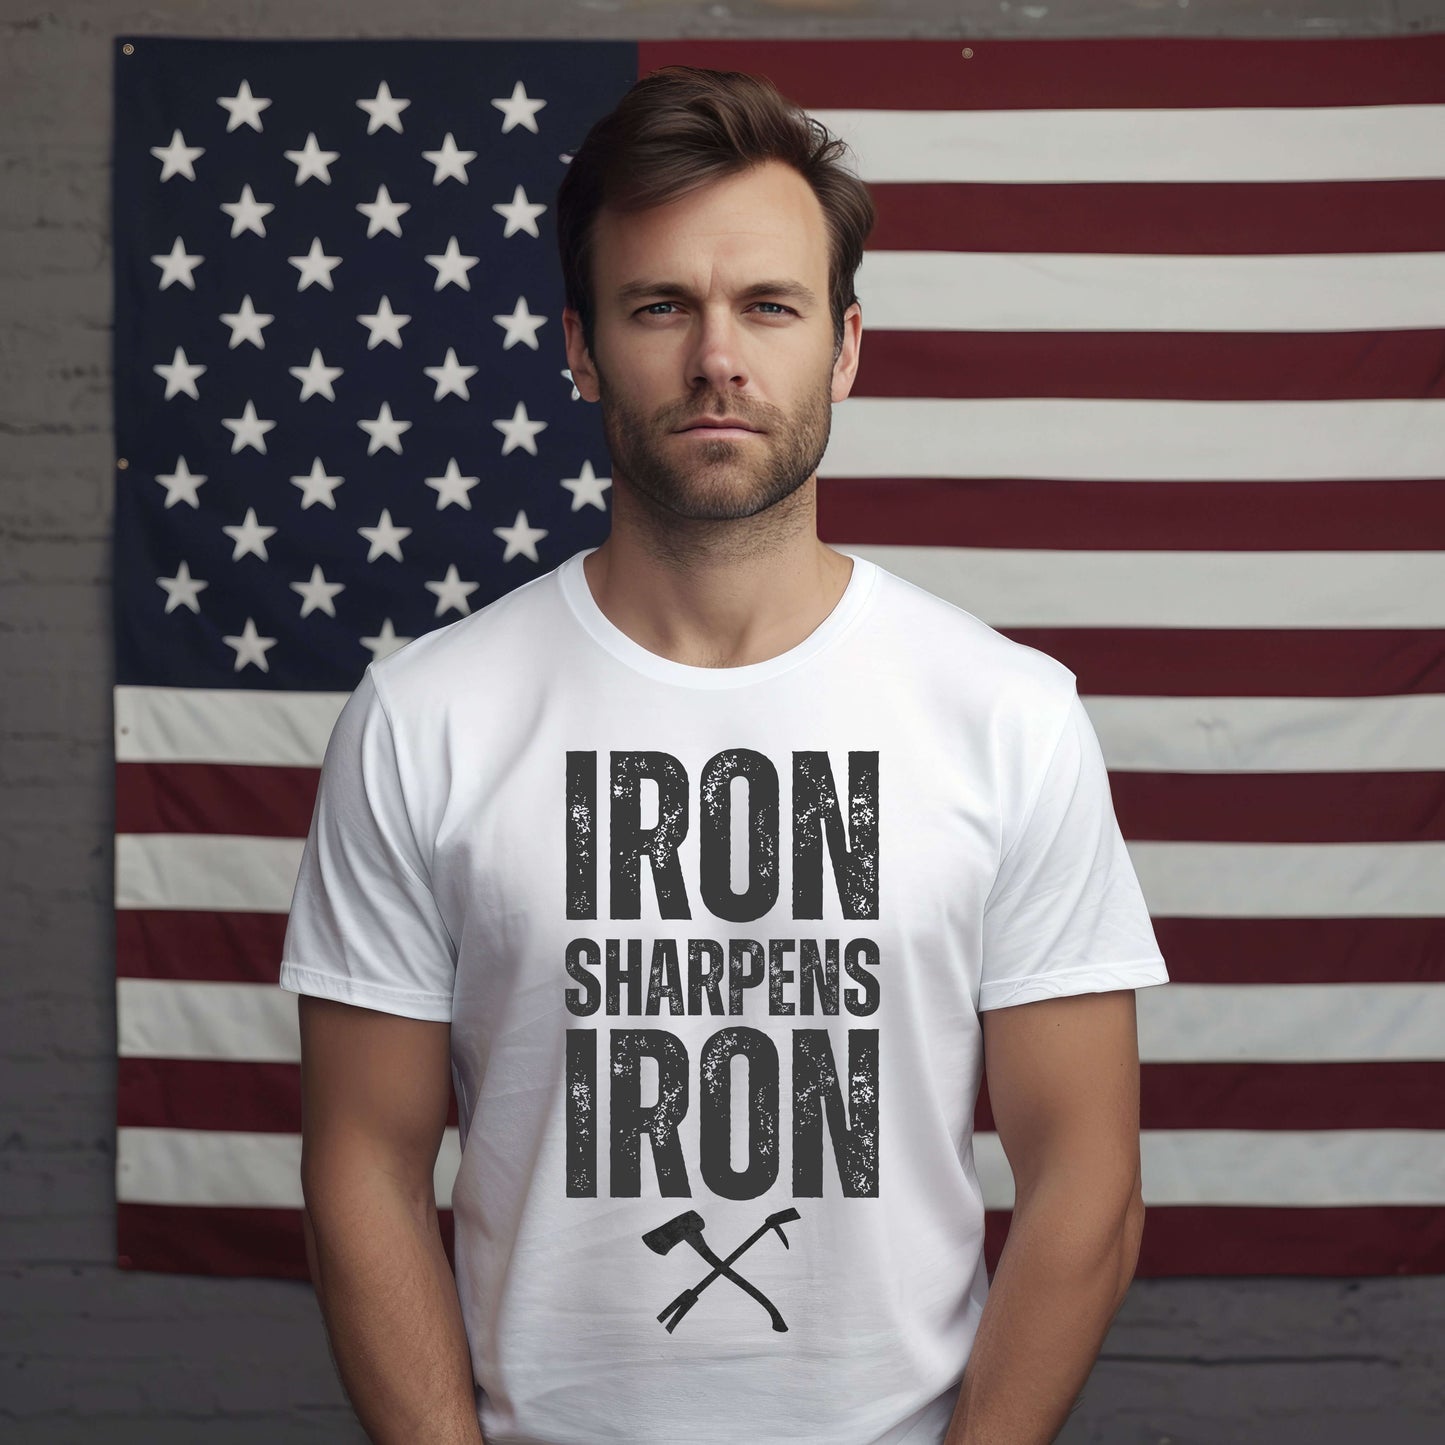 Iron Sharpens Iron Proverbs 27:17 Unisex T-shirt with a set of irons - White T-shirt